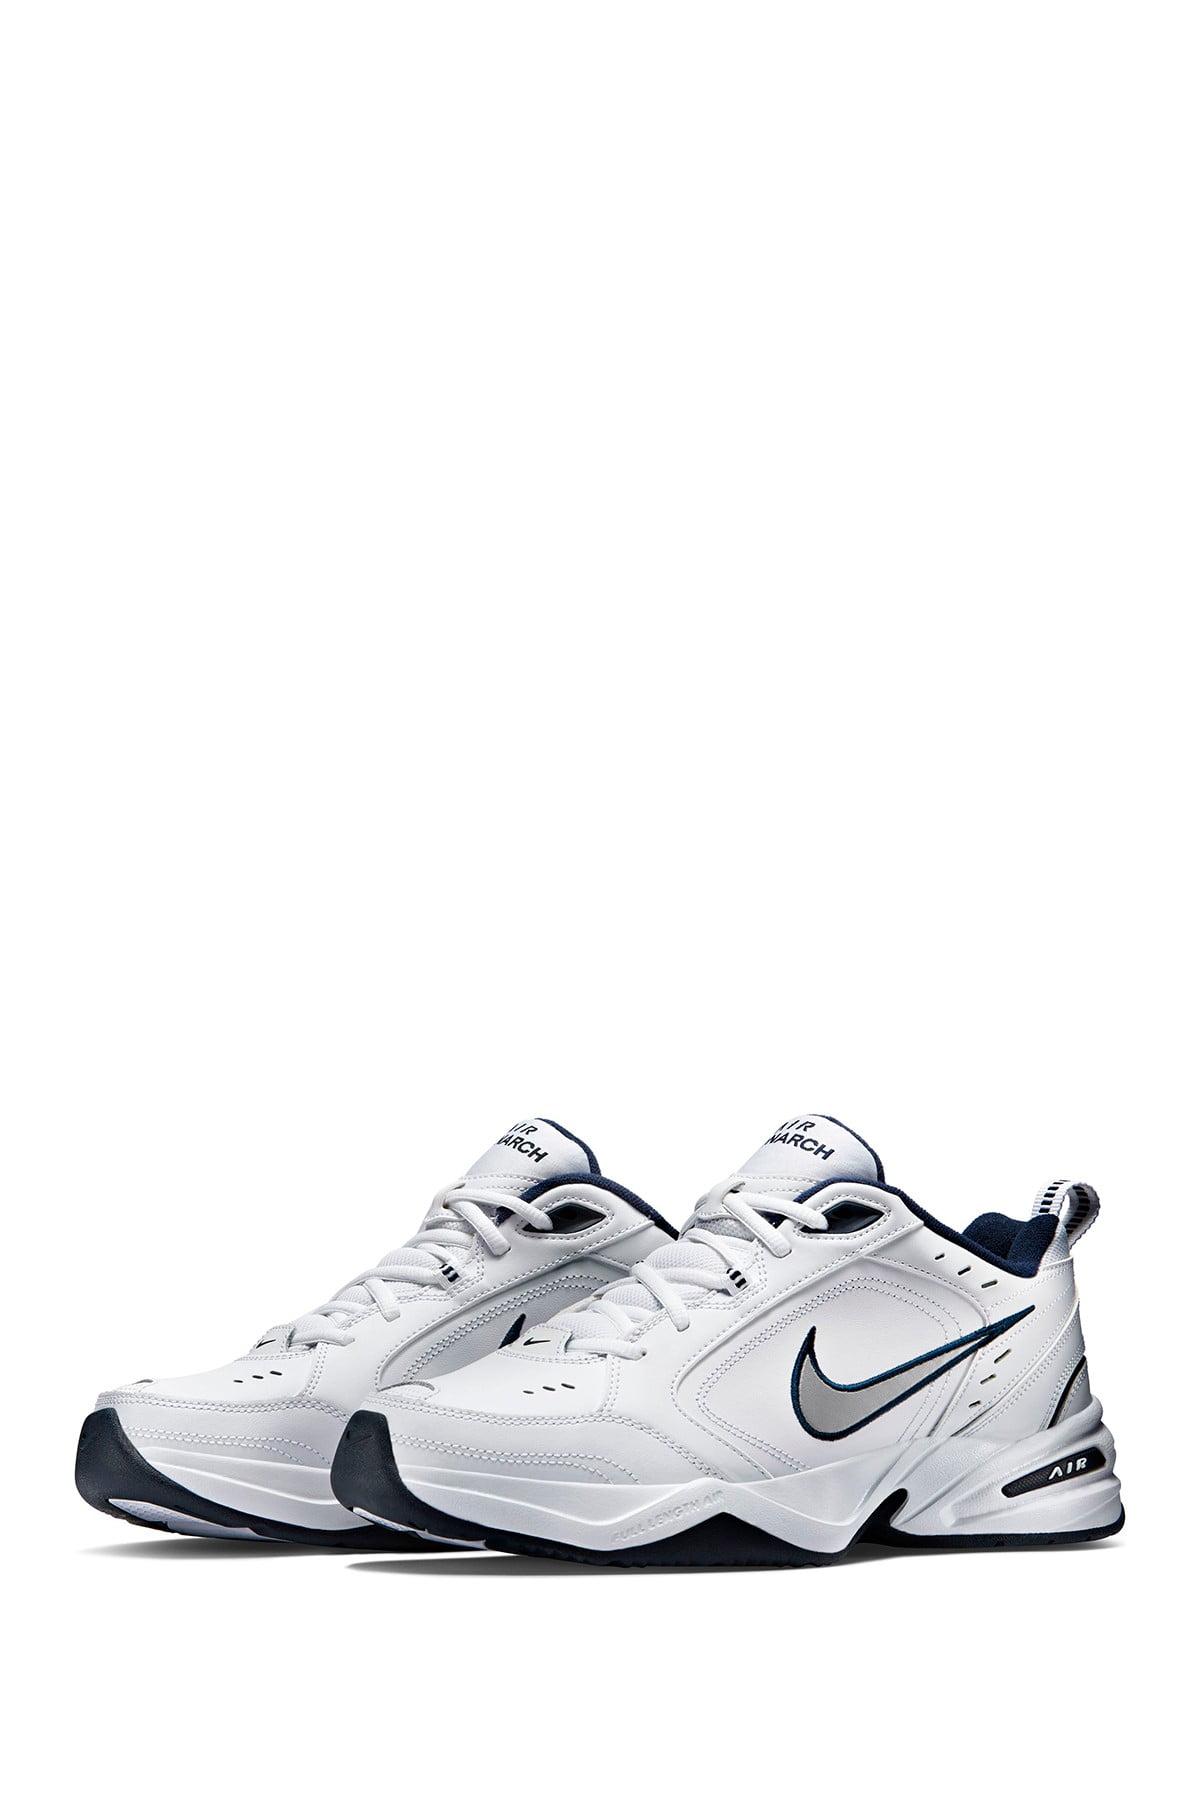 Nike Leather Air Monarch Iv Training Shoe in White/Blue (White) for Men -  Save 84% | Lyst